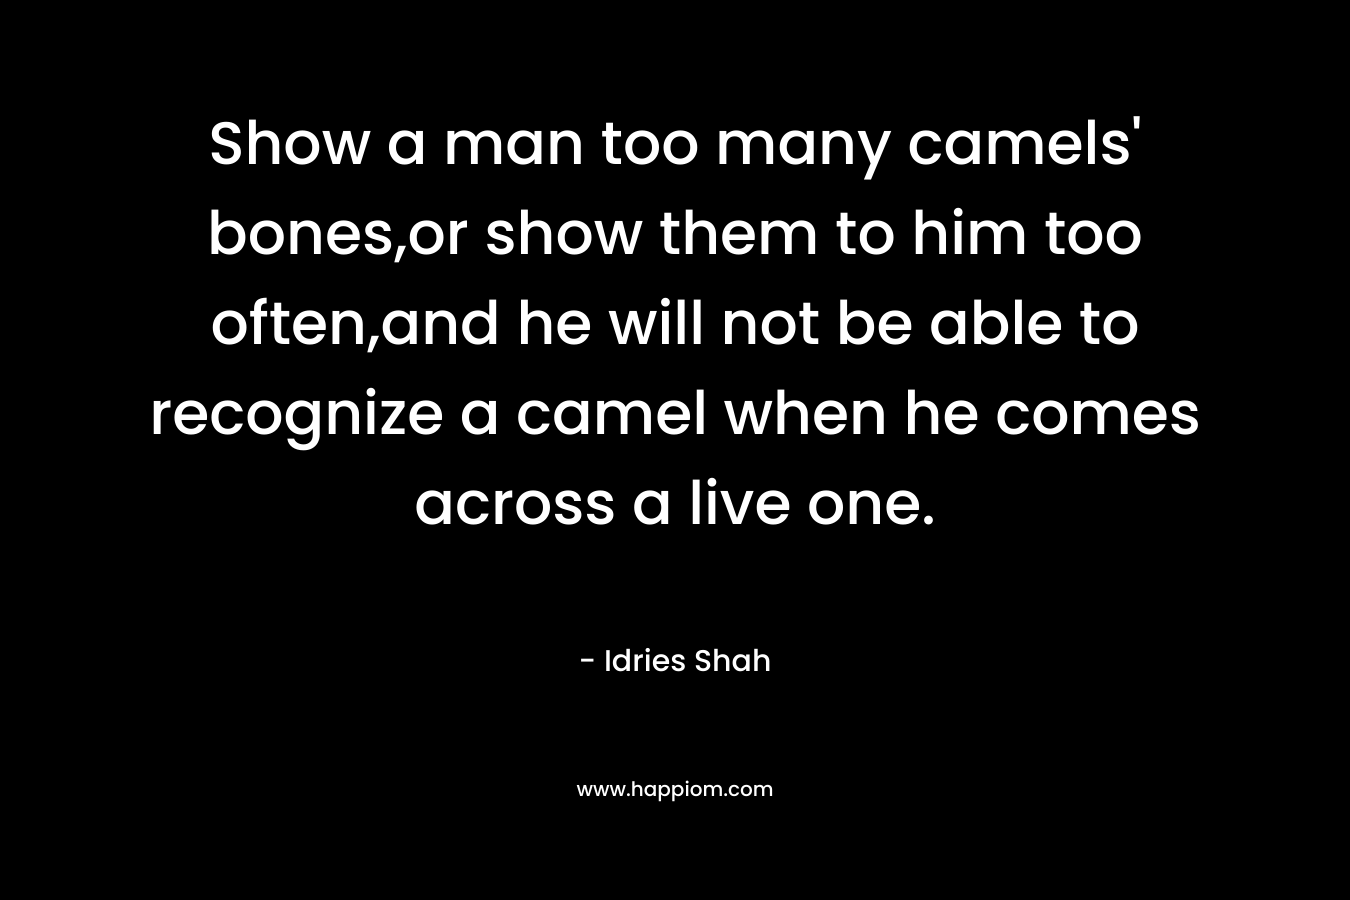 Show a man too many camels' bones,or show them to him too often,and he will not be able to recognize a camel when he comes across a live one.